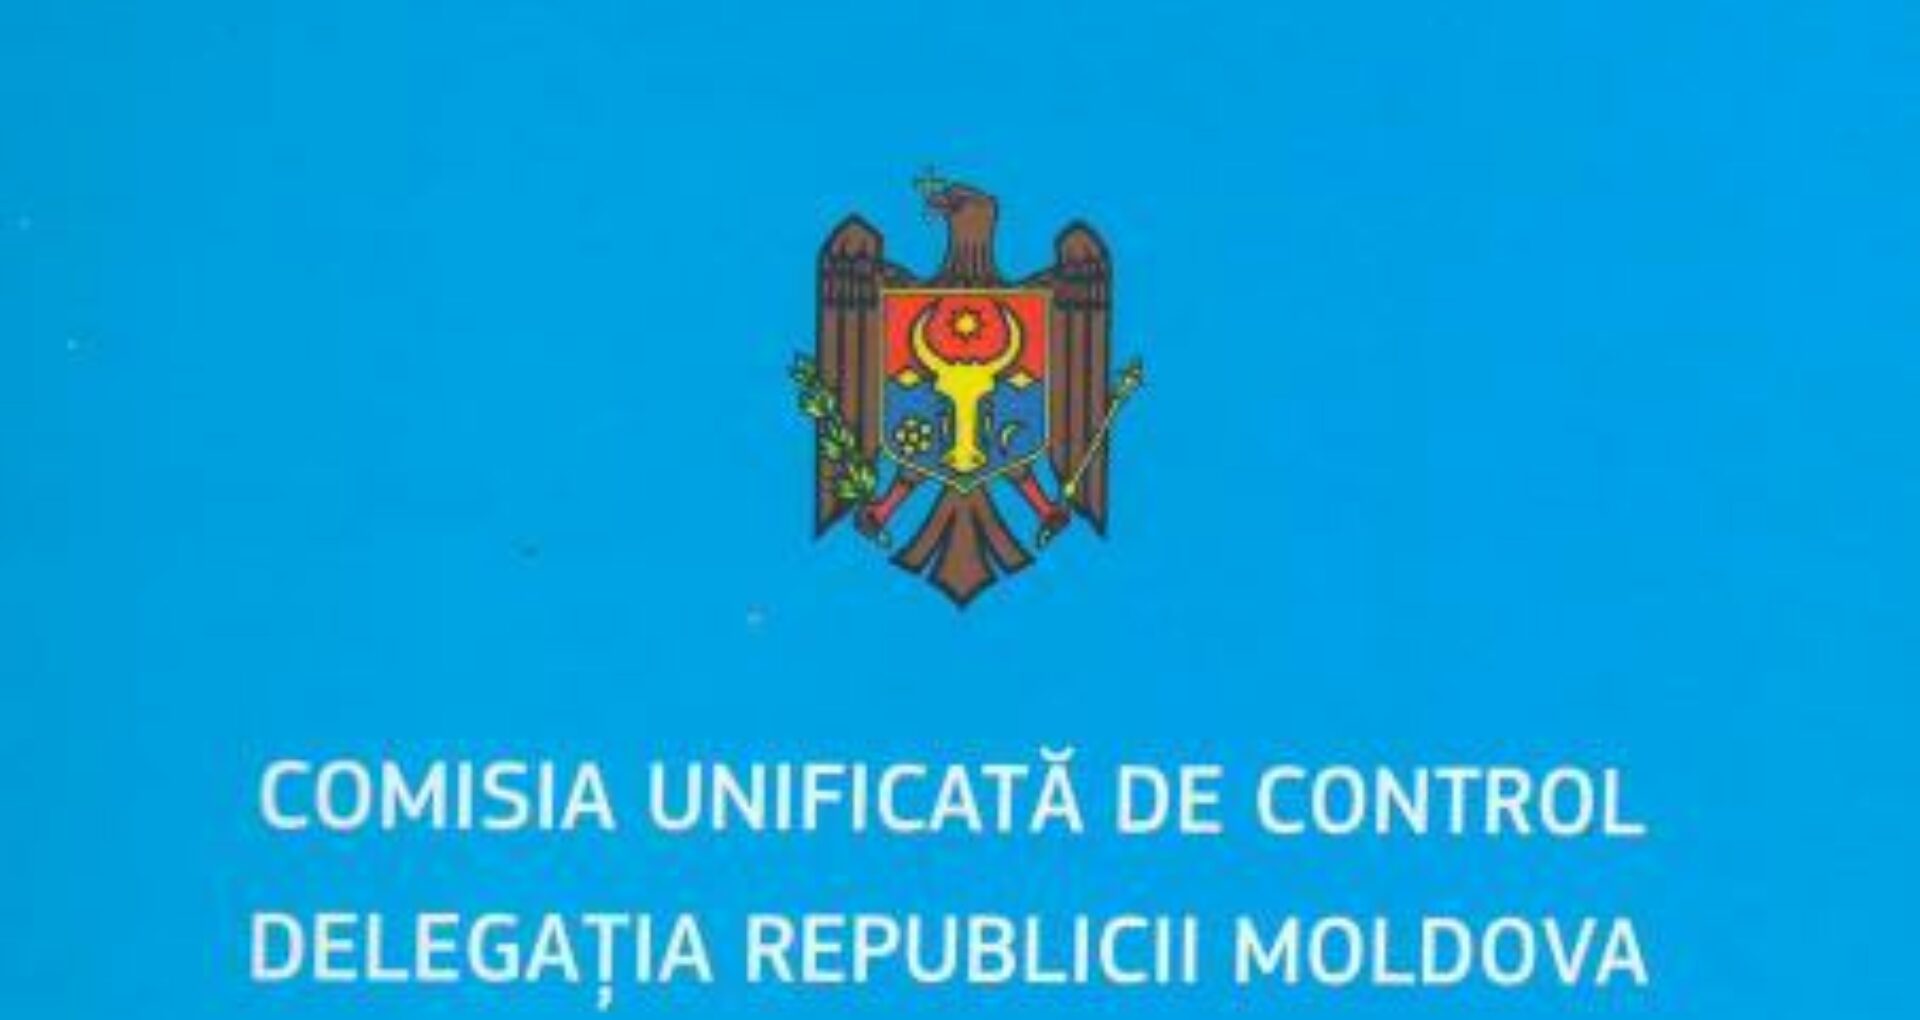 Illegal Border Guards Posts In Transnistrian Security Zone A Sticking Point On Joint Control Commission Agenda